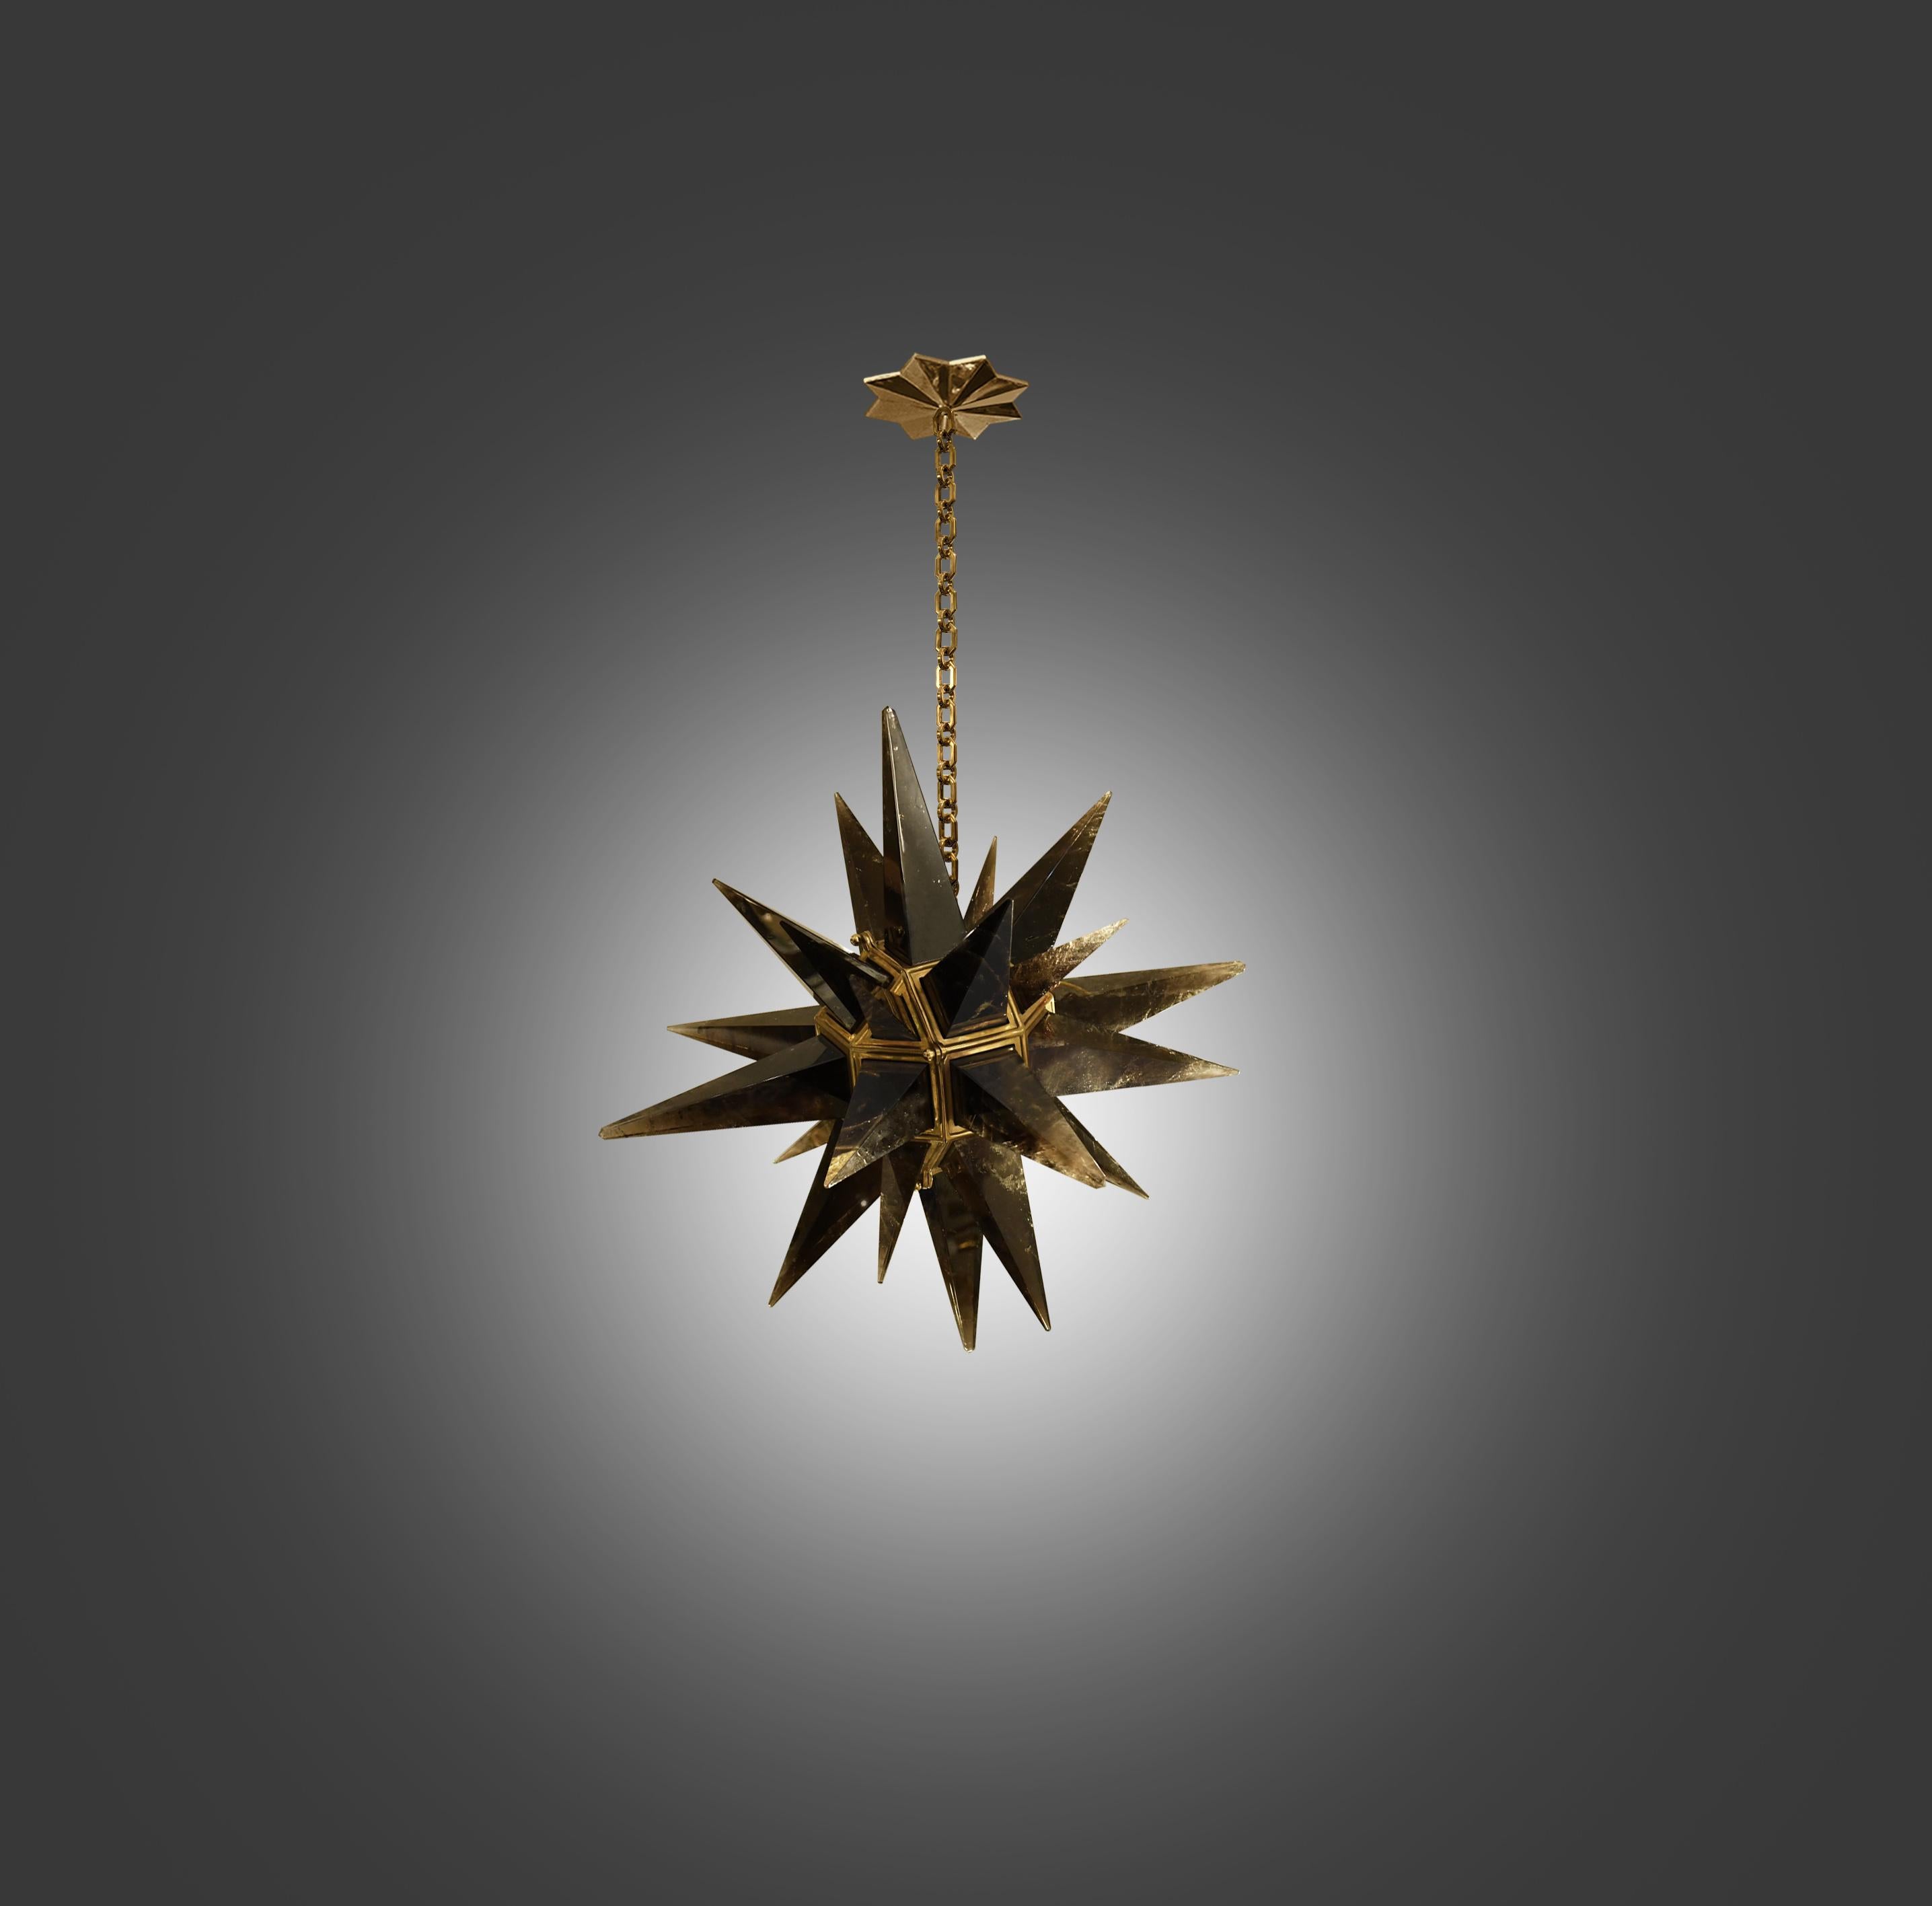 A modern dark brown rock crystal star chandelier with brass frame. Created by Phoenix Gallery, NYC.
The chandelier is 22